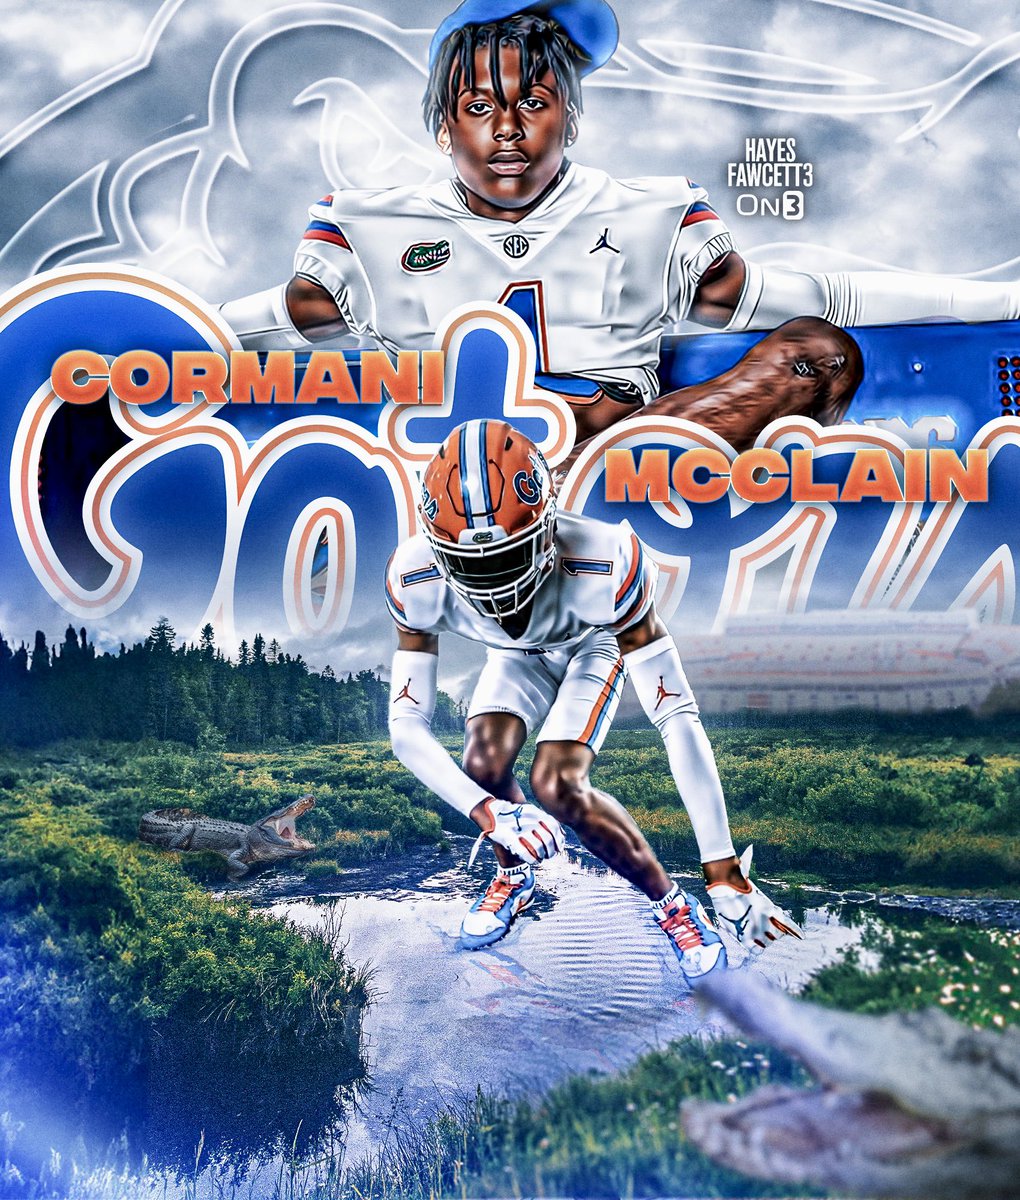 BREAKING: Former Colorado CB Cormani McClain has Committed to Florida, he tells @On3sports 

The 6’3 173 CB from Lakeland, FL will have 3 years of eligibility remaining 

Was ranked as the No. 1 CB in the ‘23 Class (per On3 Industry)

on3.com/db/cormani-mcc…